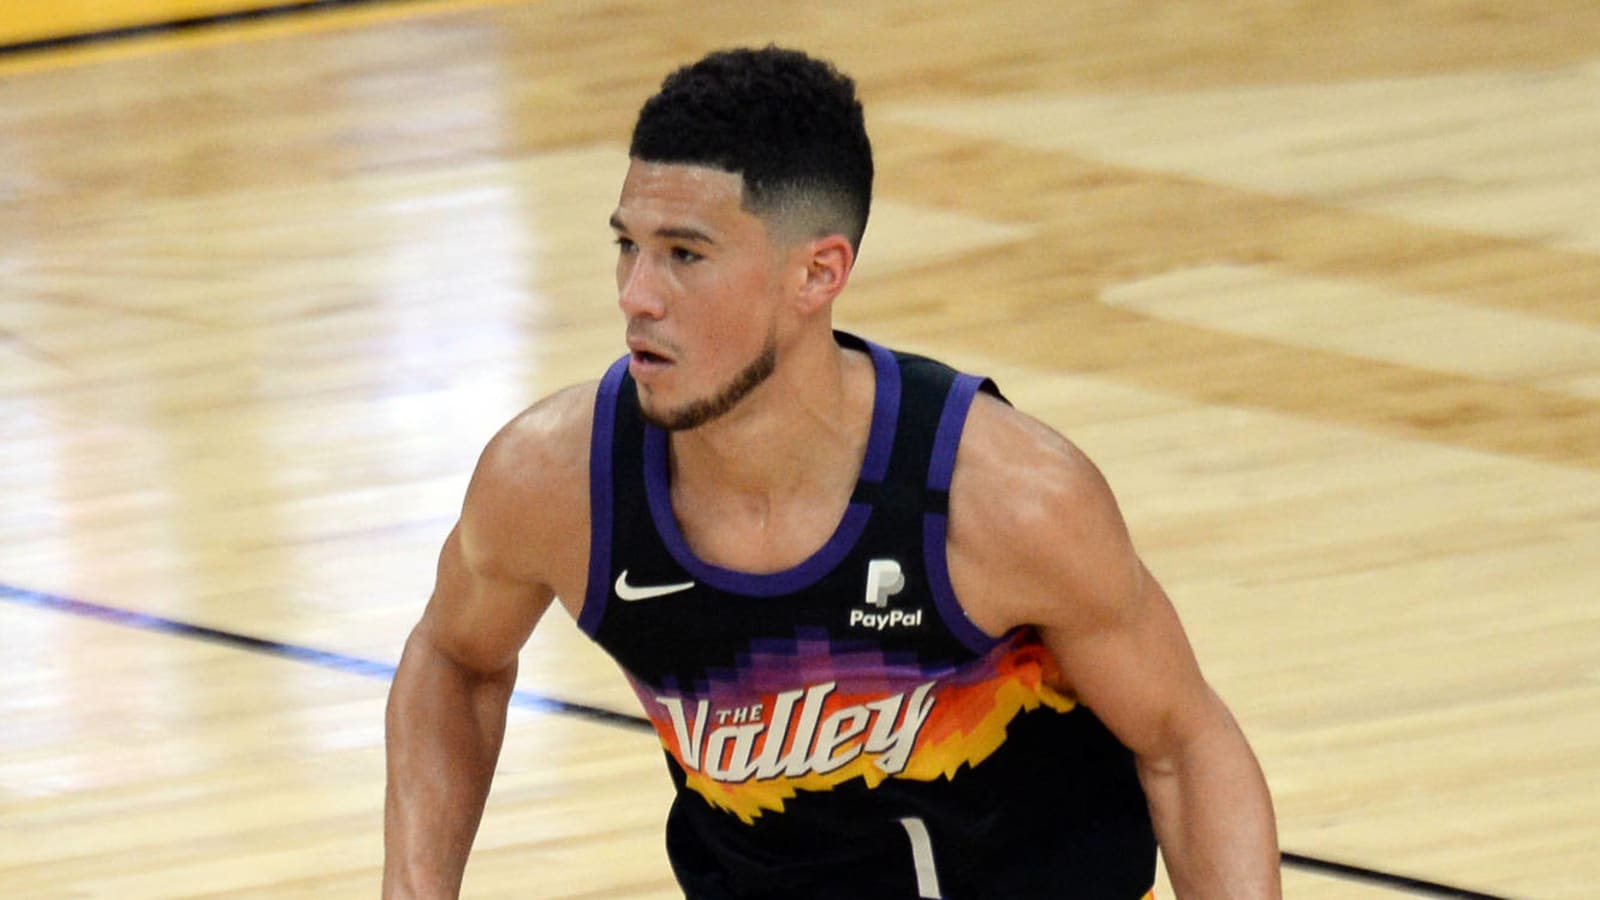 Twitter reacts to Devin Booker torching Ben Simmons after ‘best defender’ claim